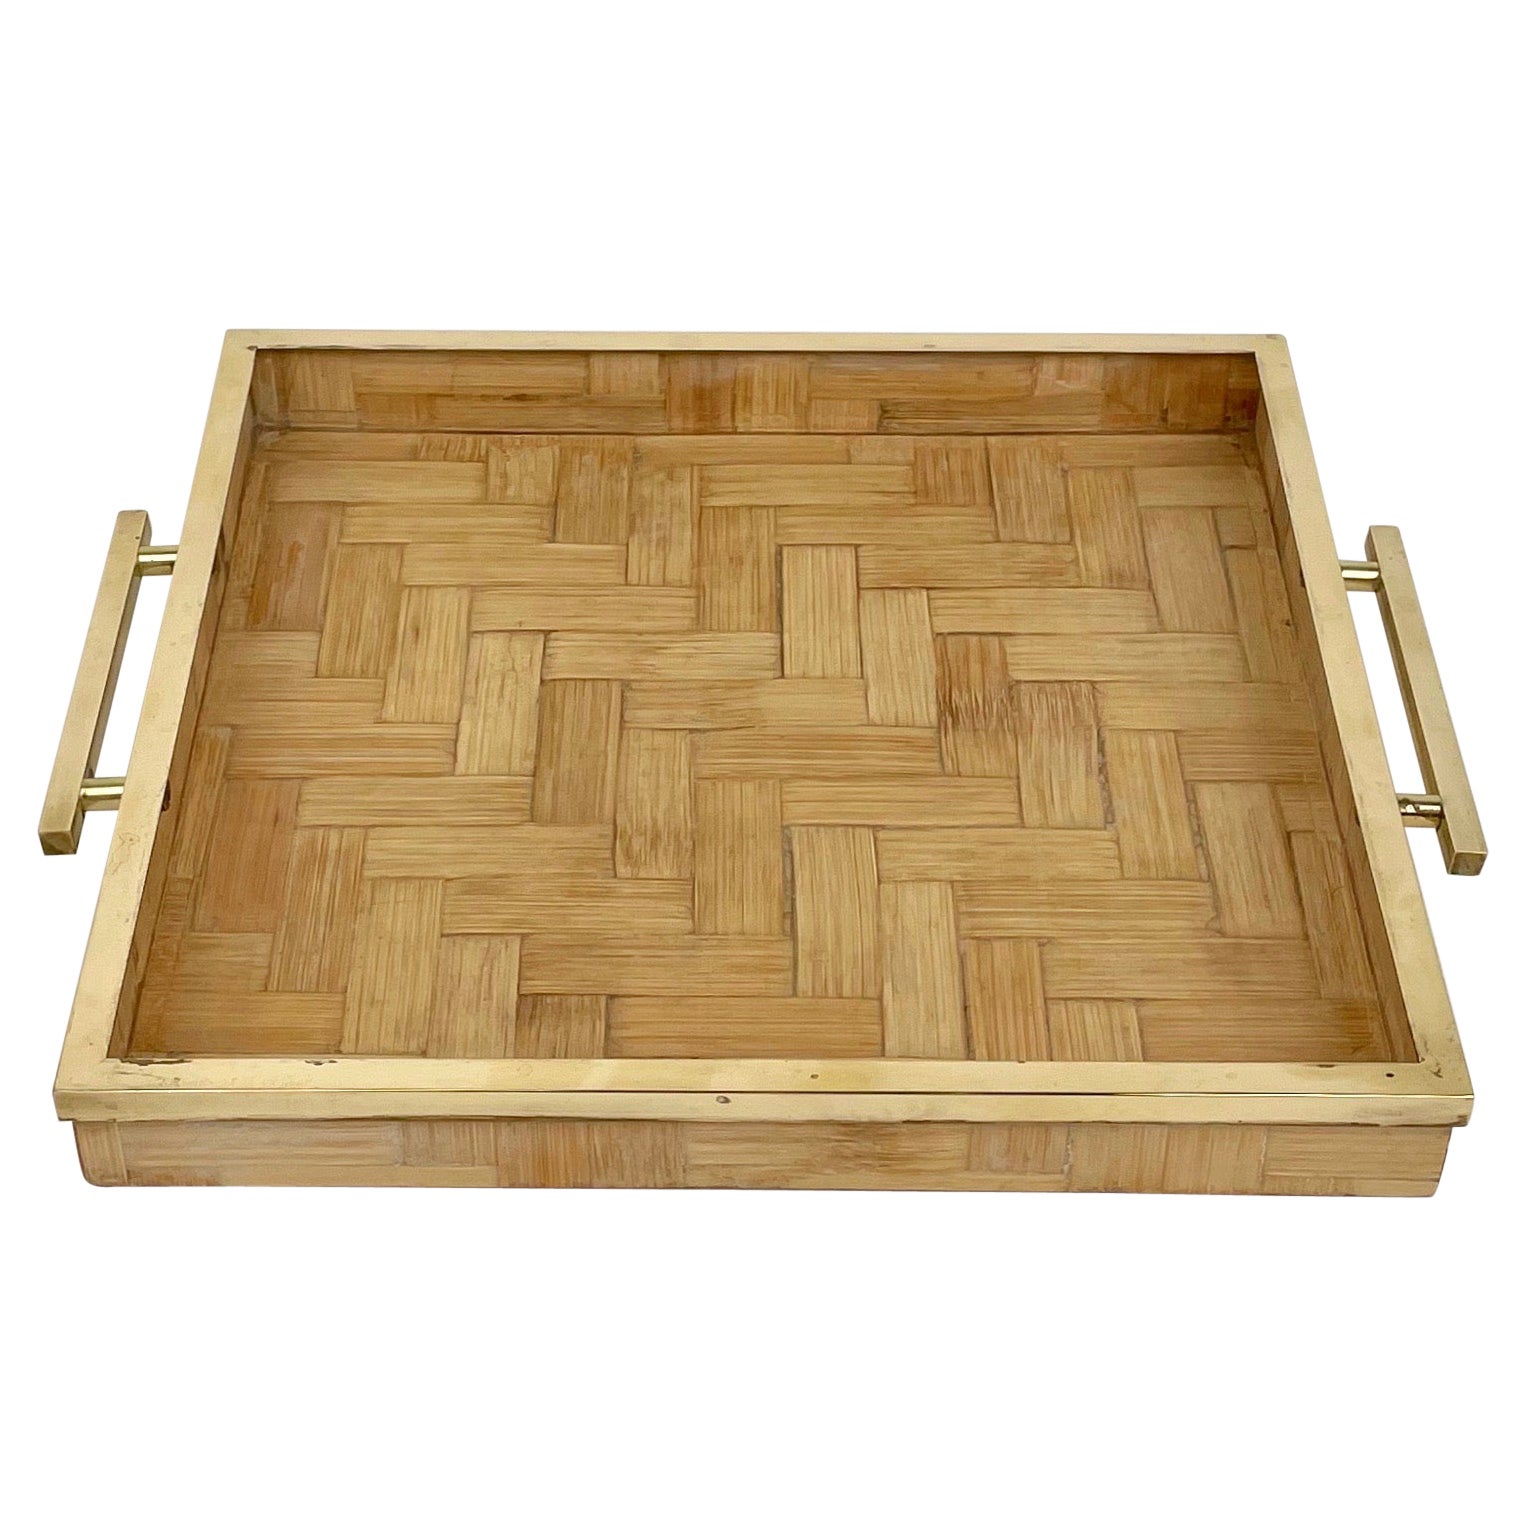 Rattan and Brass Serving Tray attributed to Tommaso Barbi, Italy 1970s